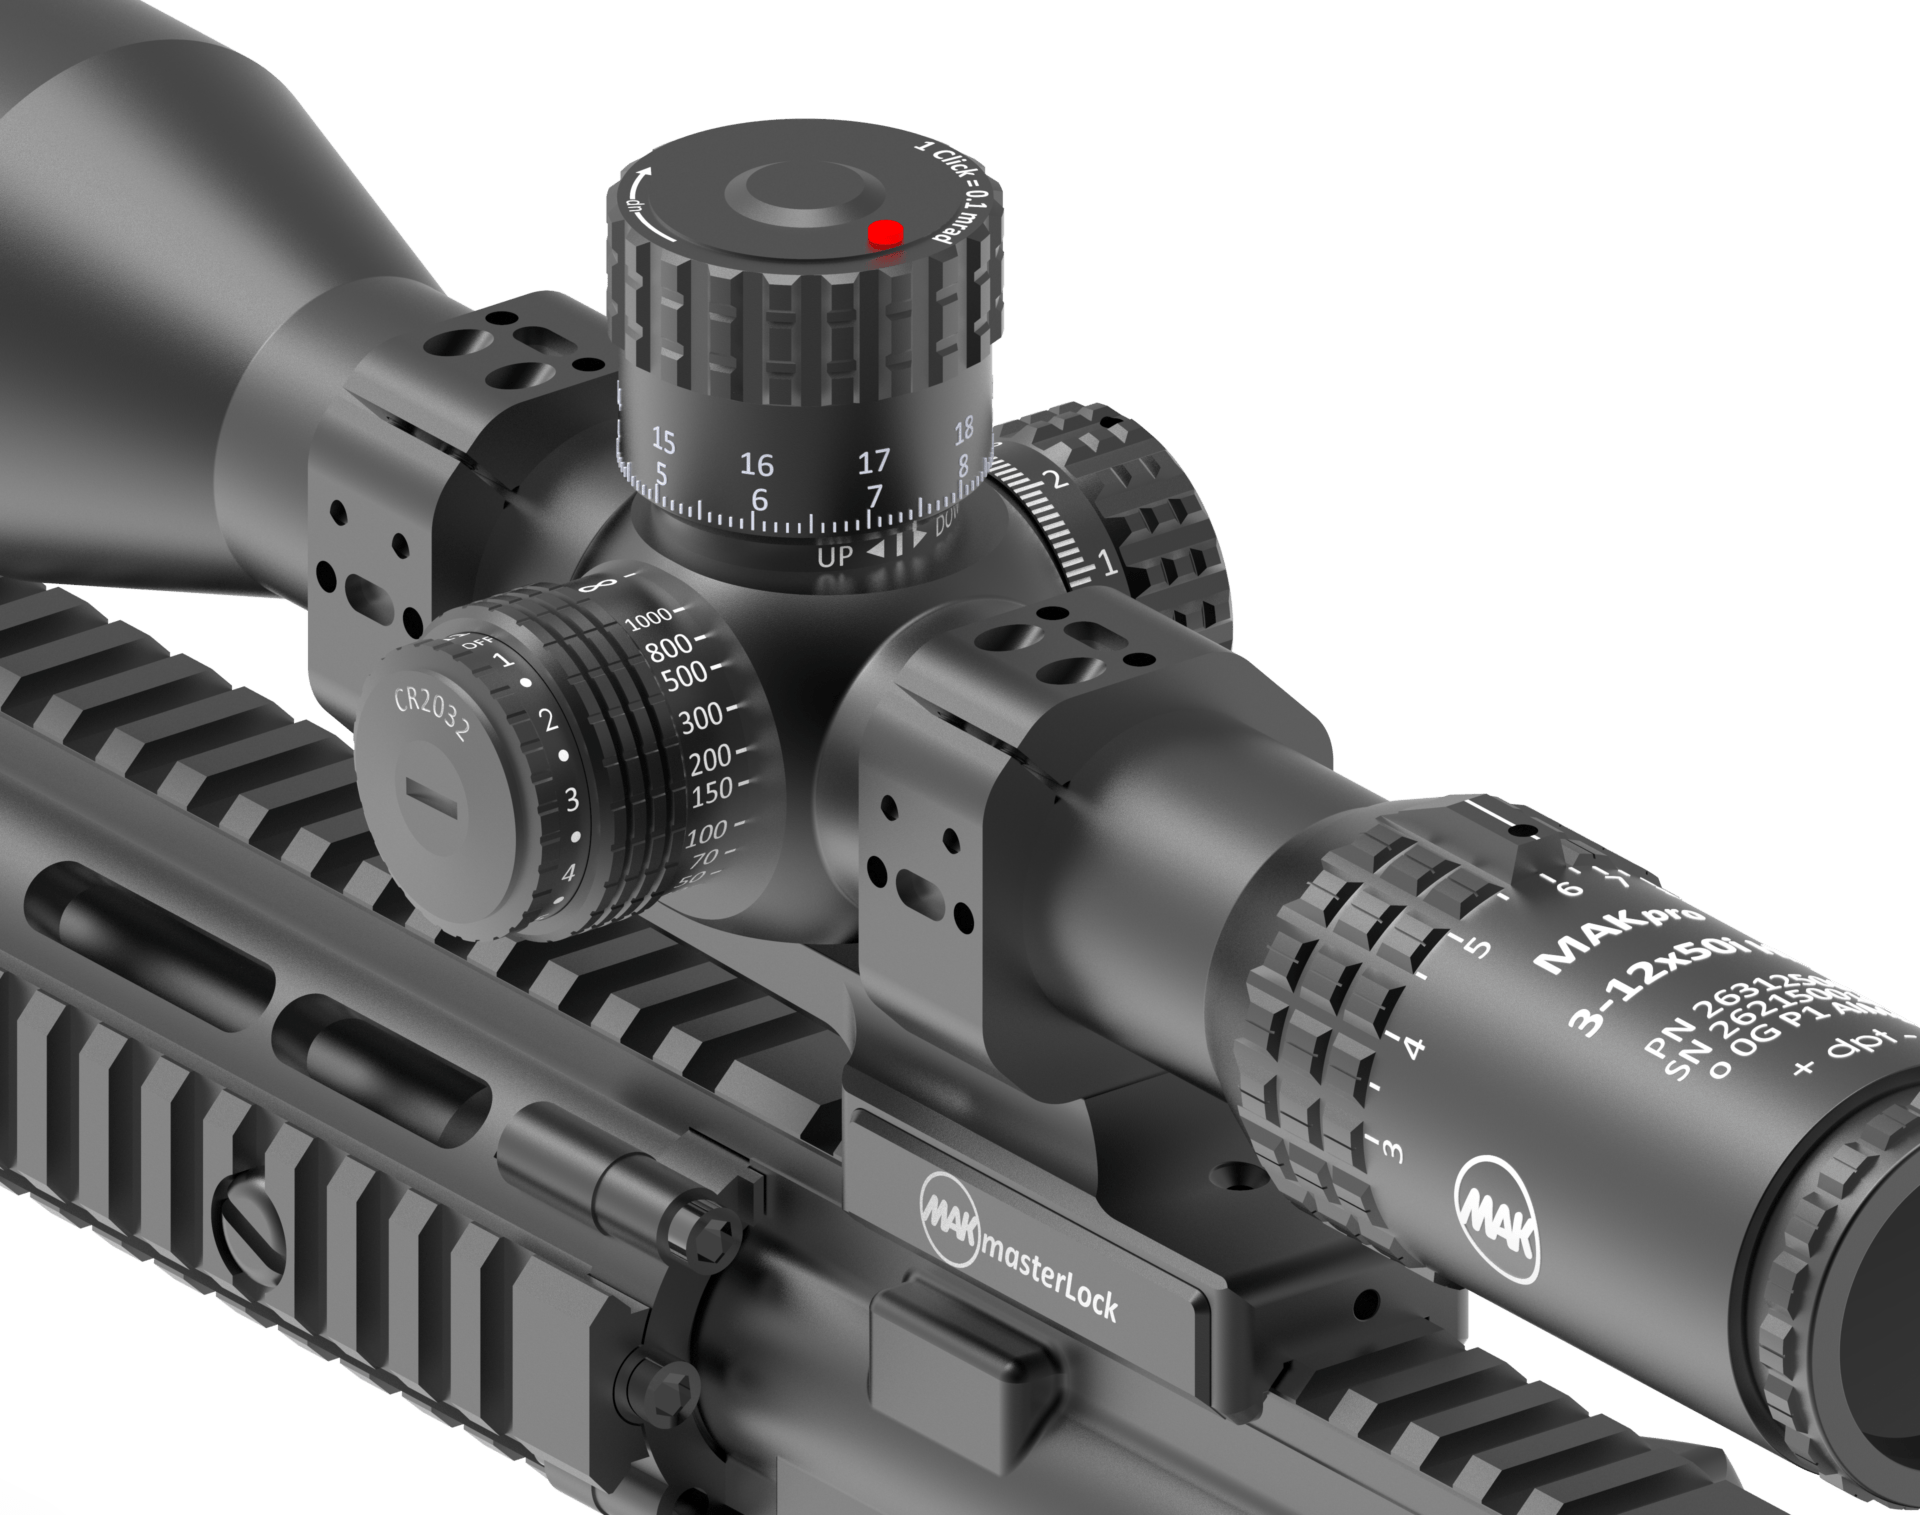 The MAKpro 5-25x56i HD is the ultimate long range riflescope for long distances and large calibers. Patented height tower with indicator pin. Absolute reliable repeatability, accuracy and precision with clear defined clicks.